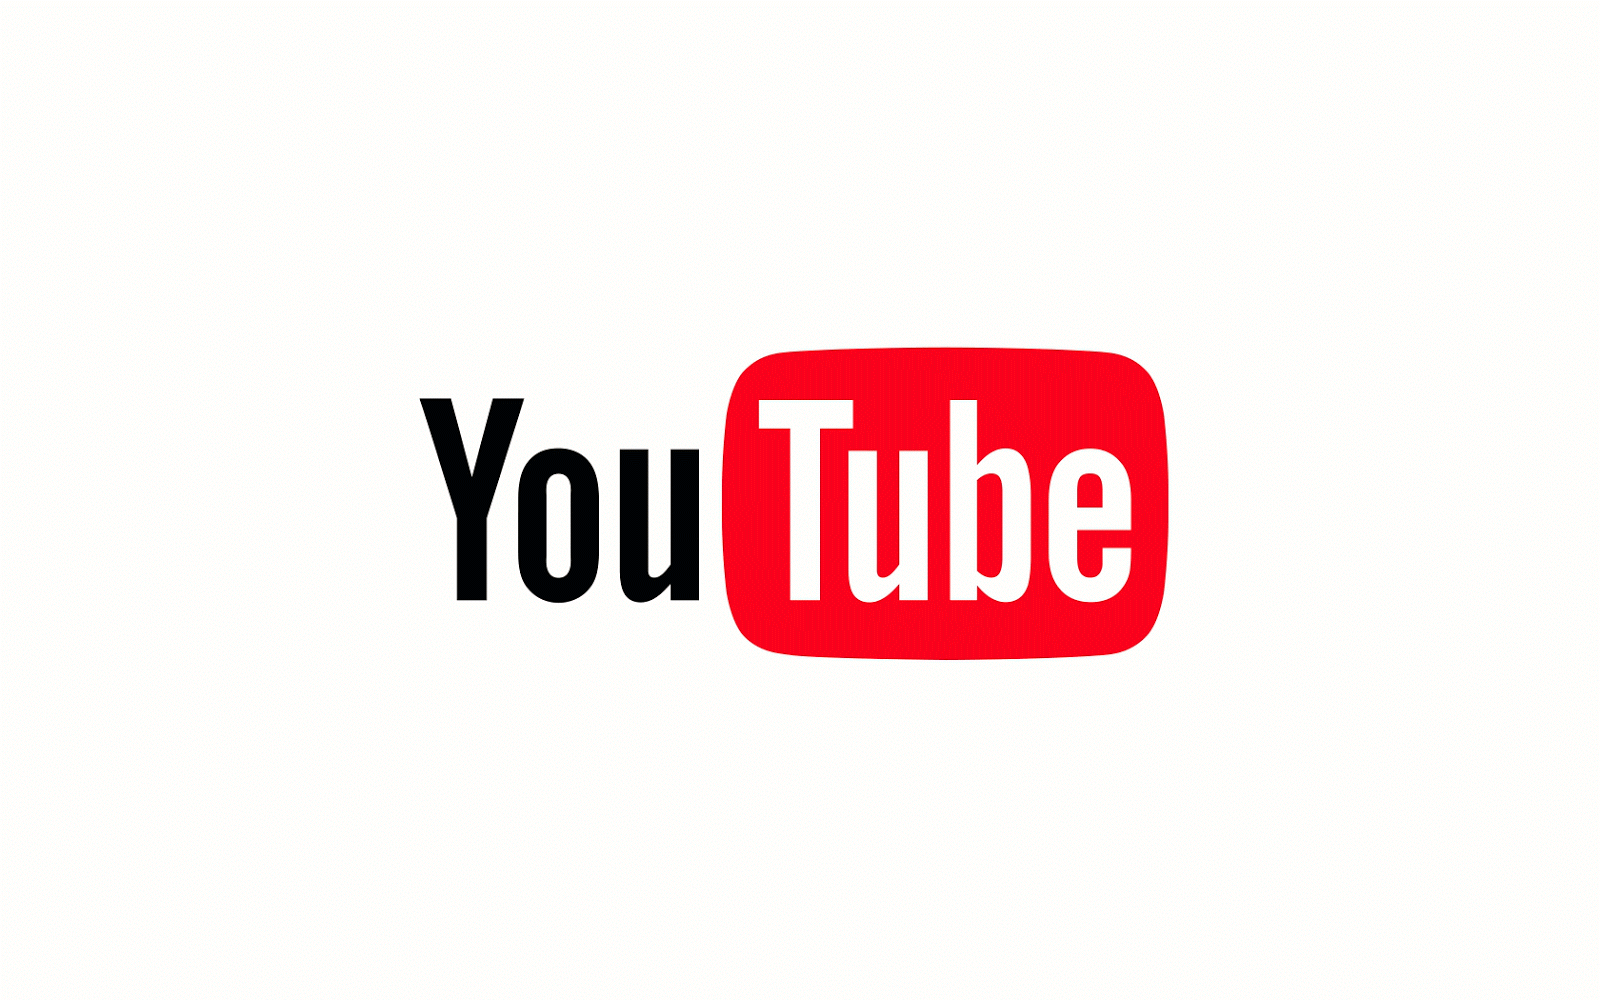 YouTube Official Logo - Official YouTube Blog: A new YouTube look that works